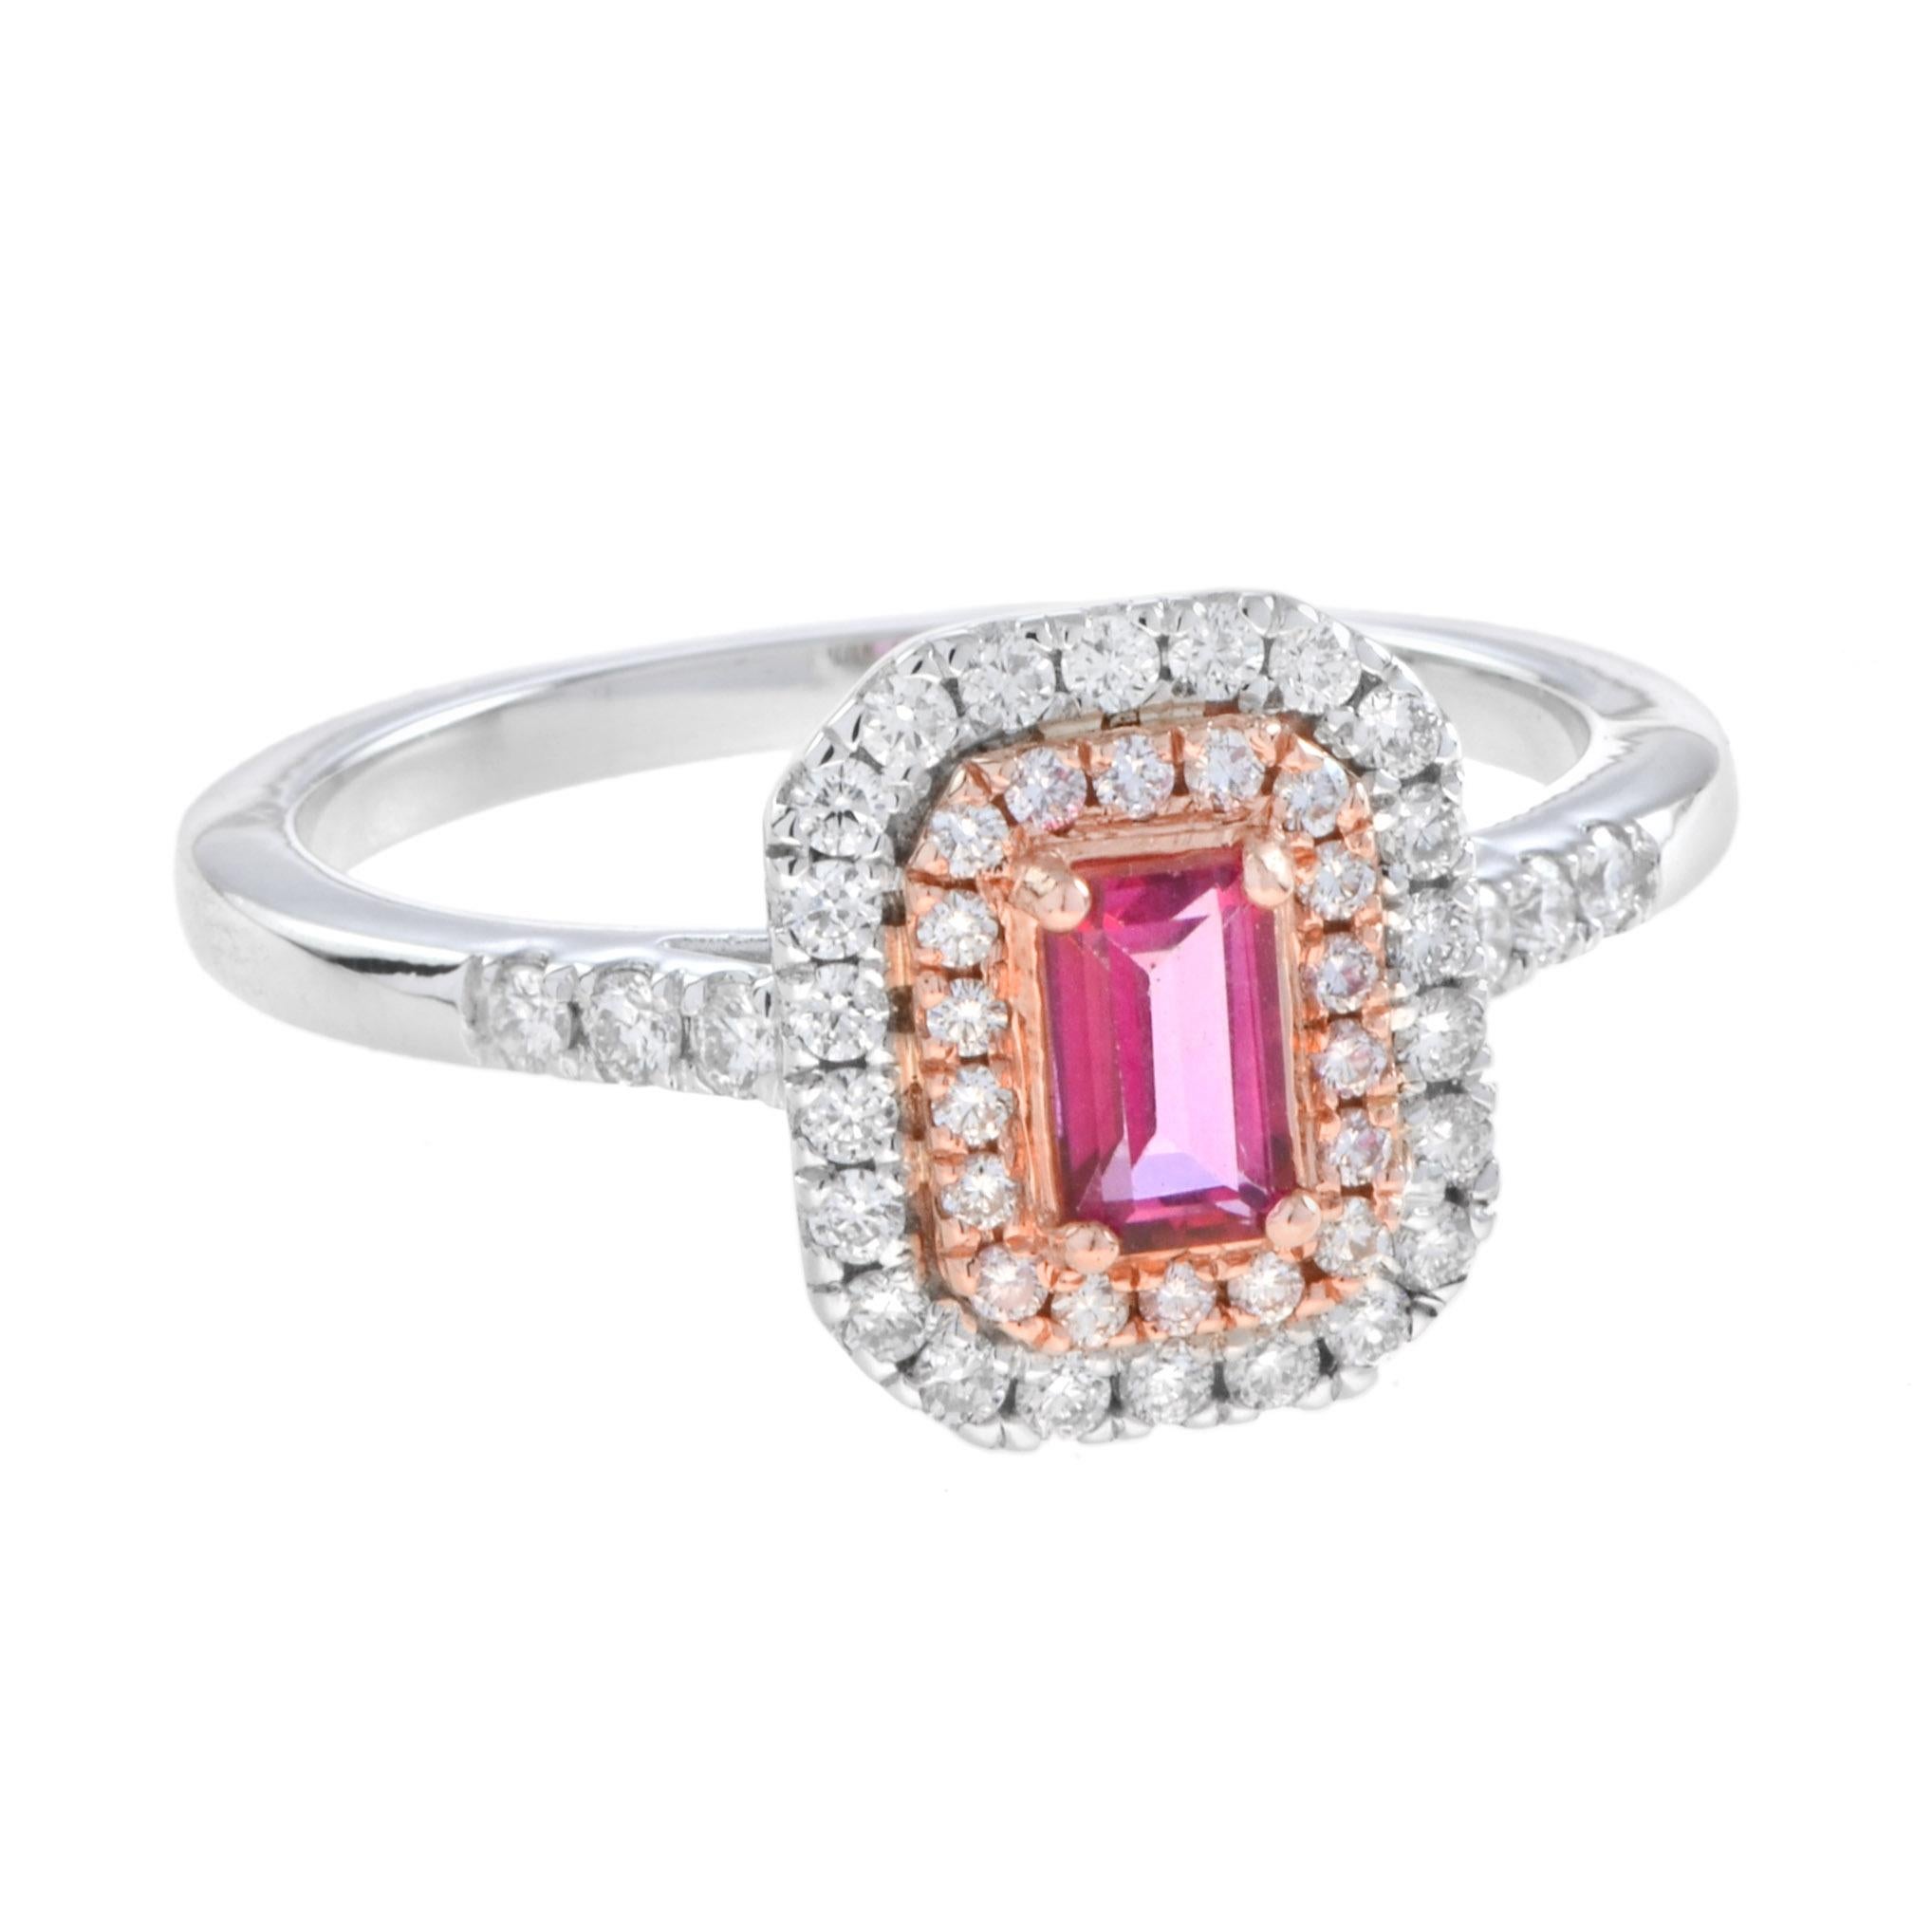 The two-tone version of standout double halo engagement ring is designed to hold 0.4 carat emerald cut pink sapphire center stone. The outer halo is in white gold while inner halo is rose gold. A truly spectacular engagement ring! Wear it with our